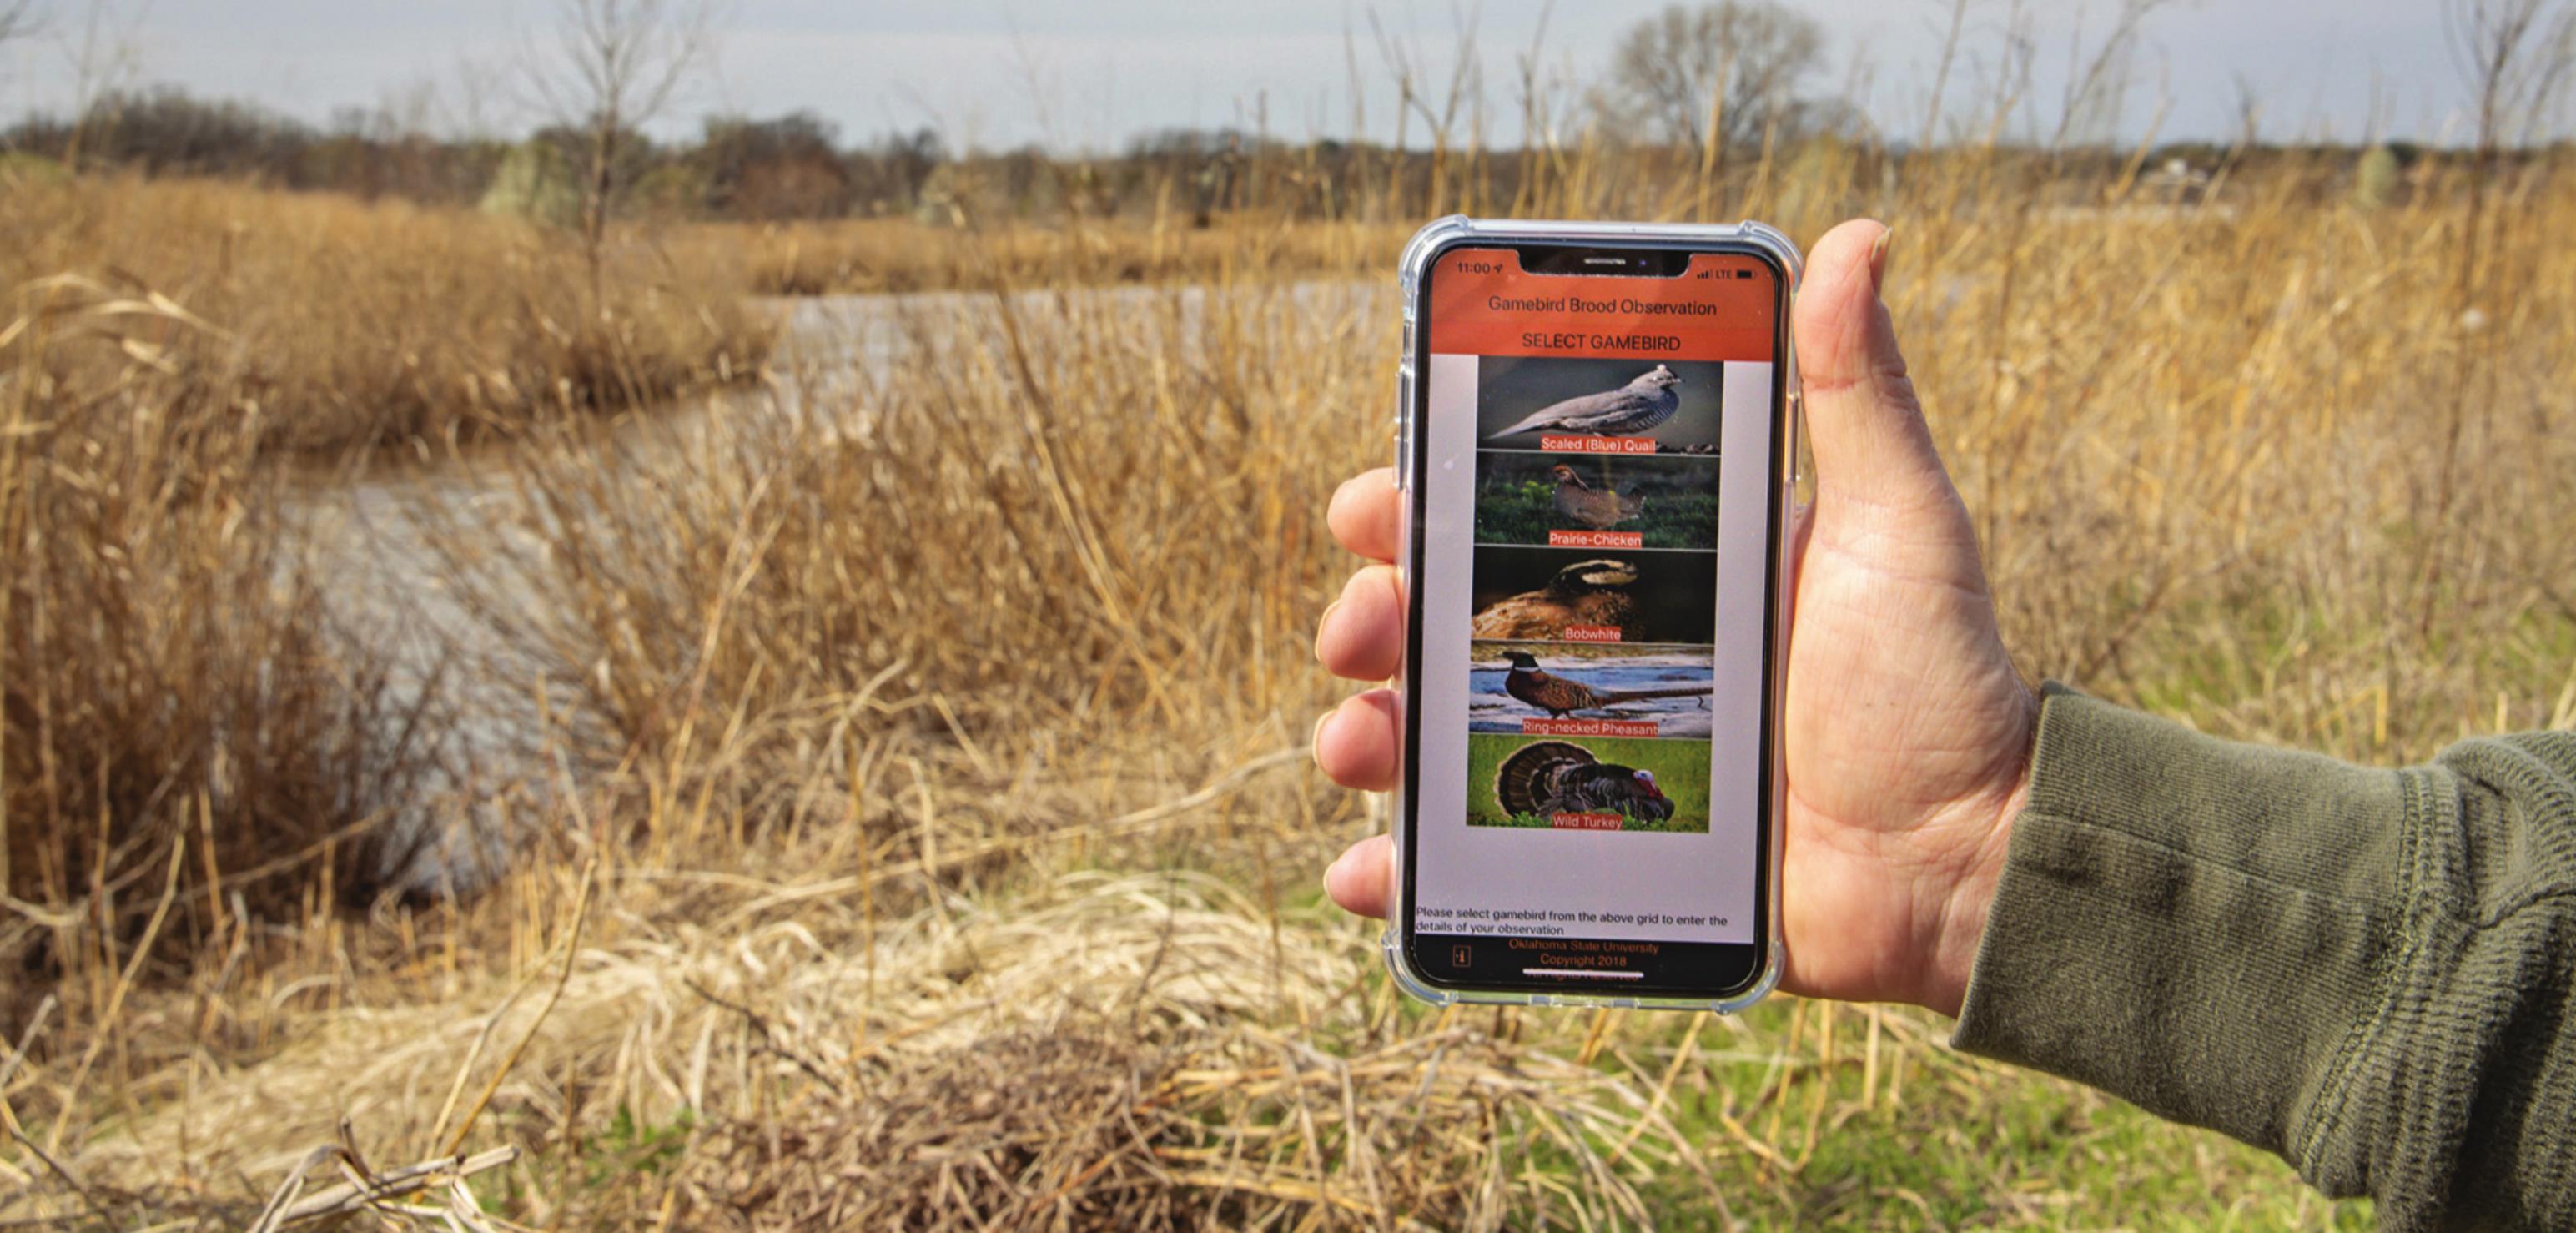 A smartphone app developed at Oklahoma State University helps the Oklahoma Department of Wildlife Conservation provide the public with more accurate hunting forecasts. Todd Johnson/Agricultural Communications Services